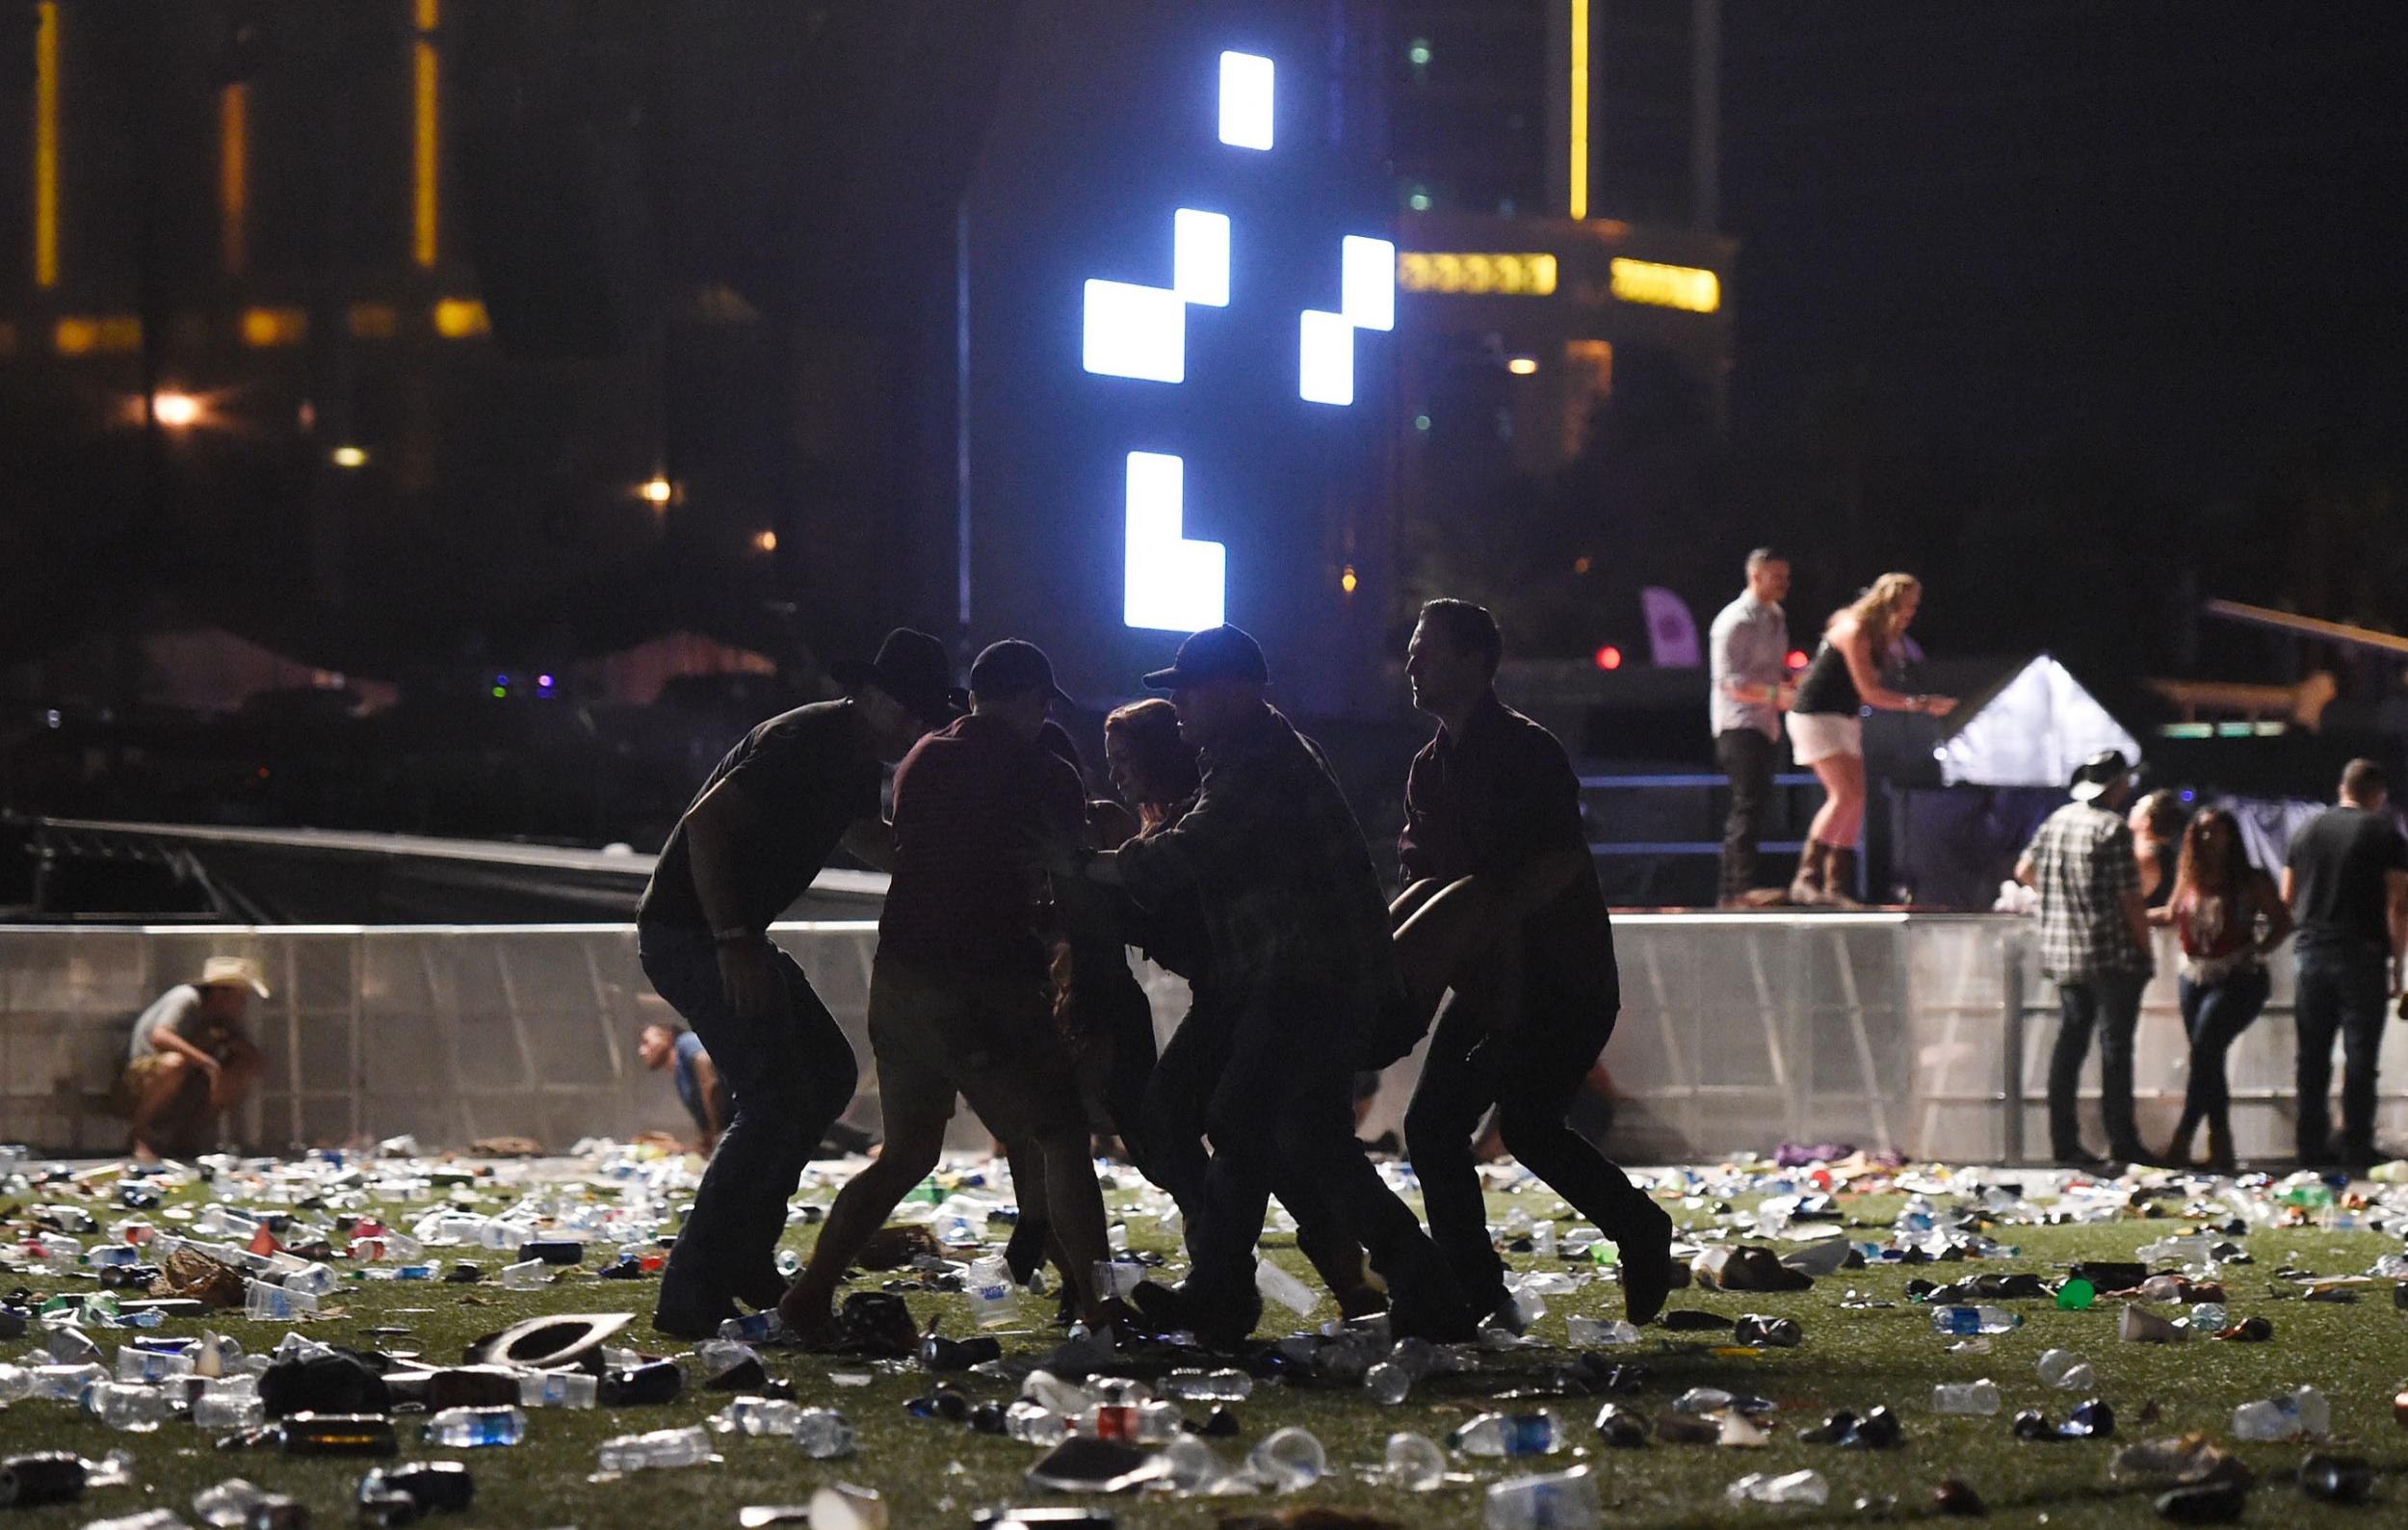 People carry an injured person at the Route 91 Harvest country music festival (Getty Images)